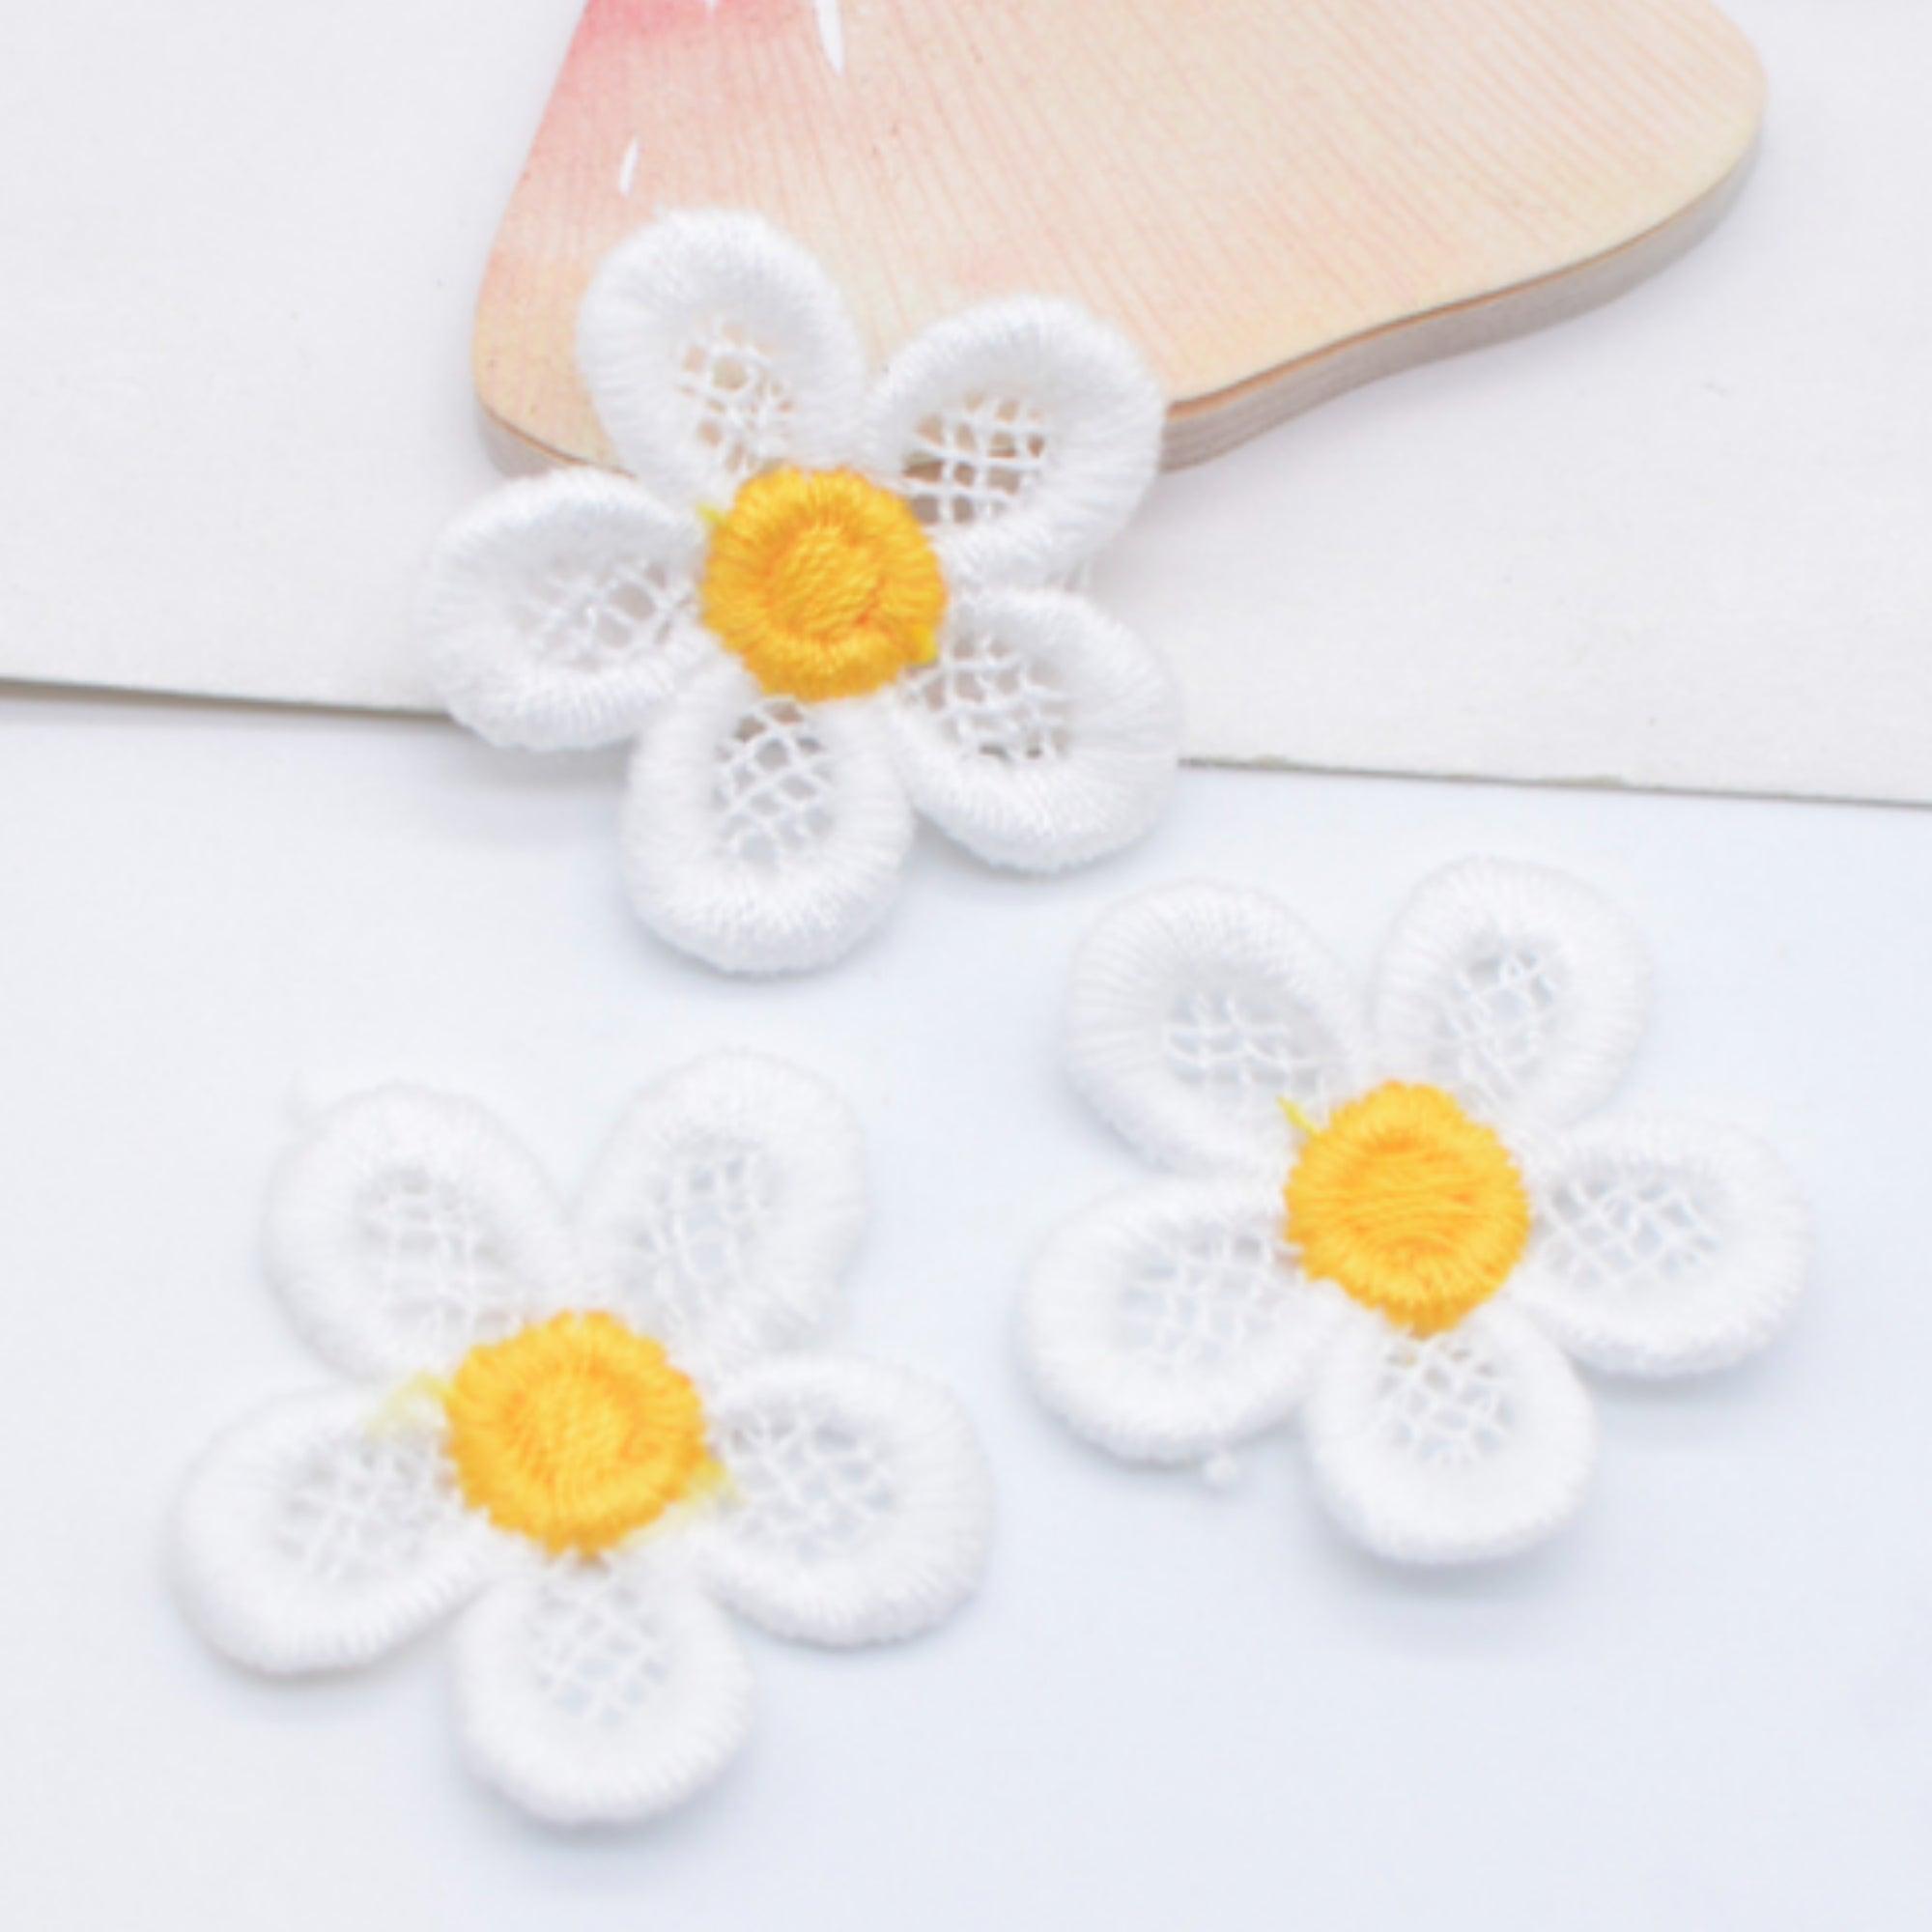 Embroidered Daisies Collection White 1" Scrapbook Embellishments by SSC Designs - 10 Pieces